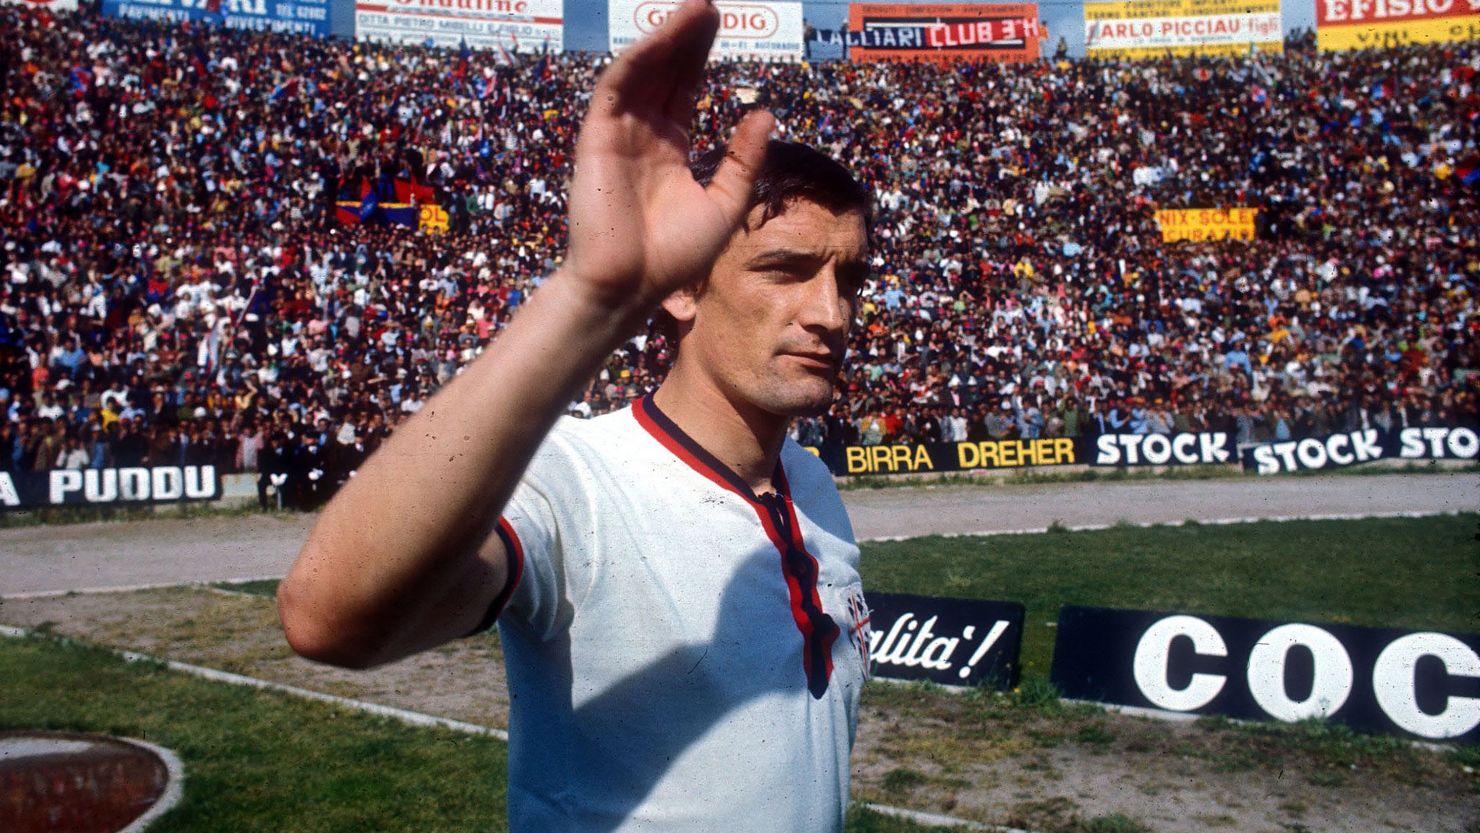 The Italian footballer Luigi 'Gigi' Riva at Cagliari ca. 1970. (Photo by: HUM Images/Universal Images Group via Getty Images)